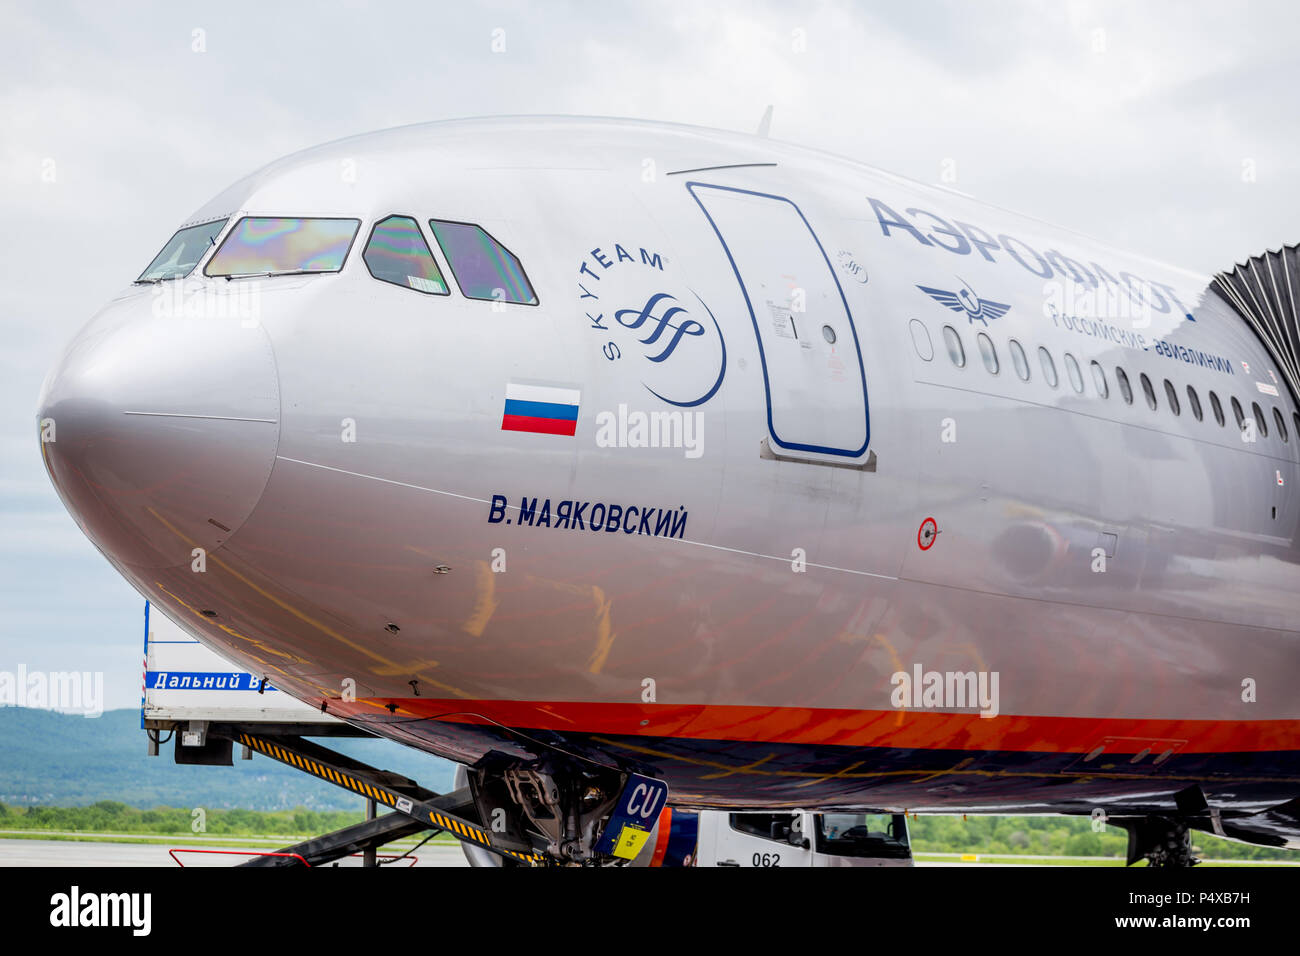 Russia, Vladivostok, 05/26/2017. Fuselage of passenger airplane Airbus A330-300 of of Aeroflot company. This airplane has own name 'V. Mayakovsky' in  Stock Photo